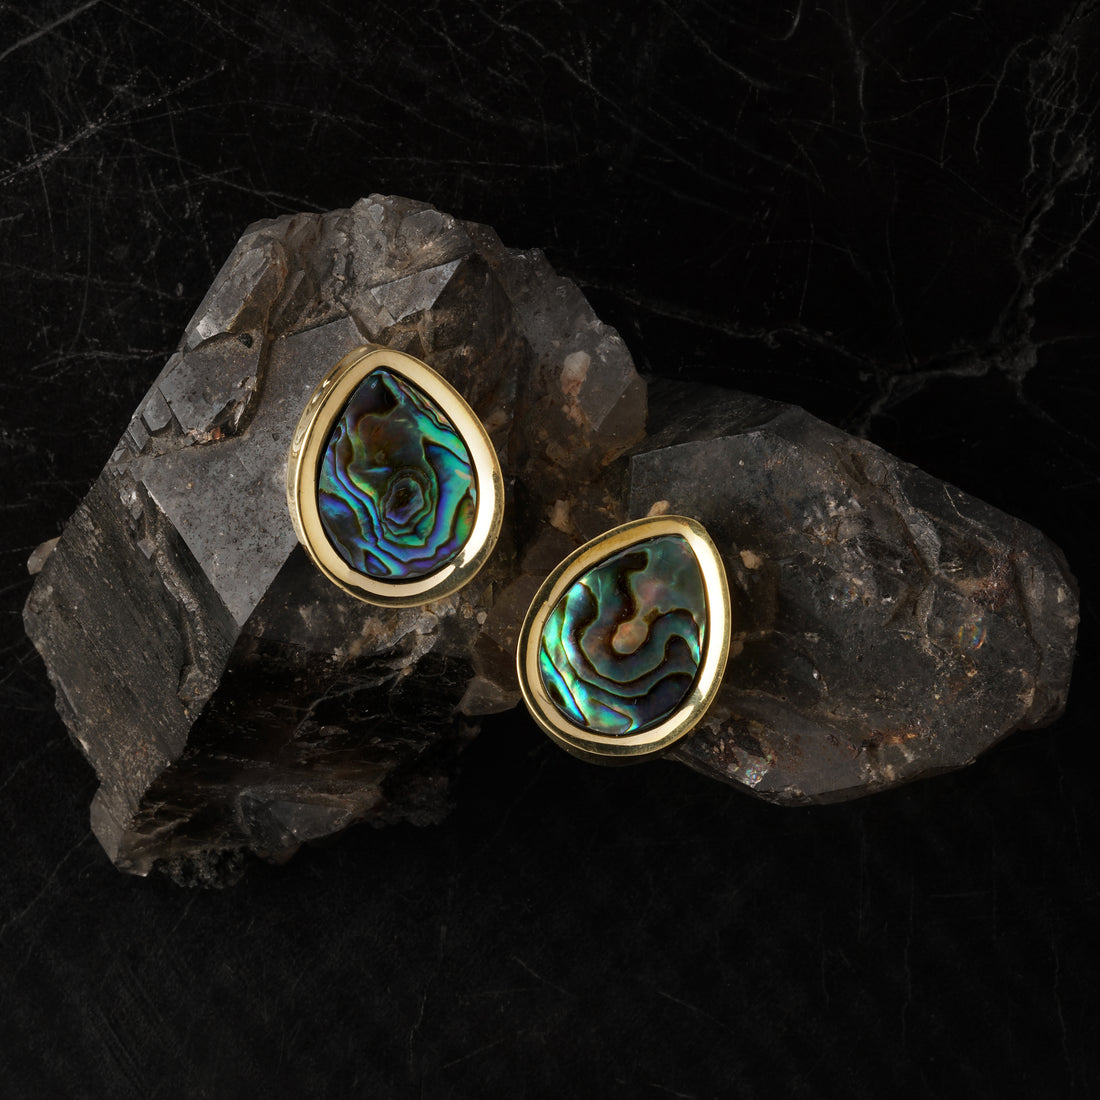 pair of Golden teardrop ear plugs with Abalone shell 